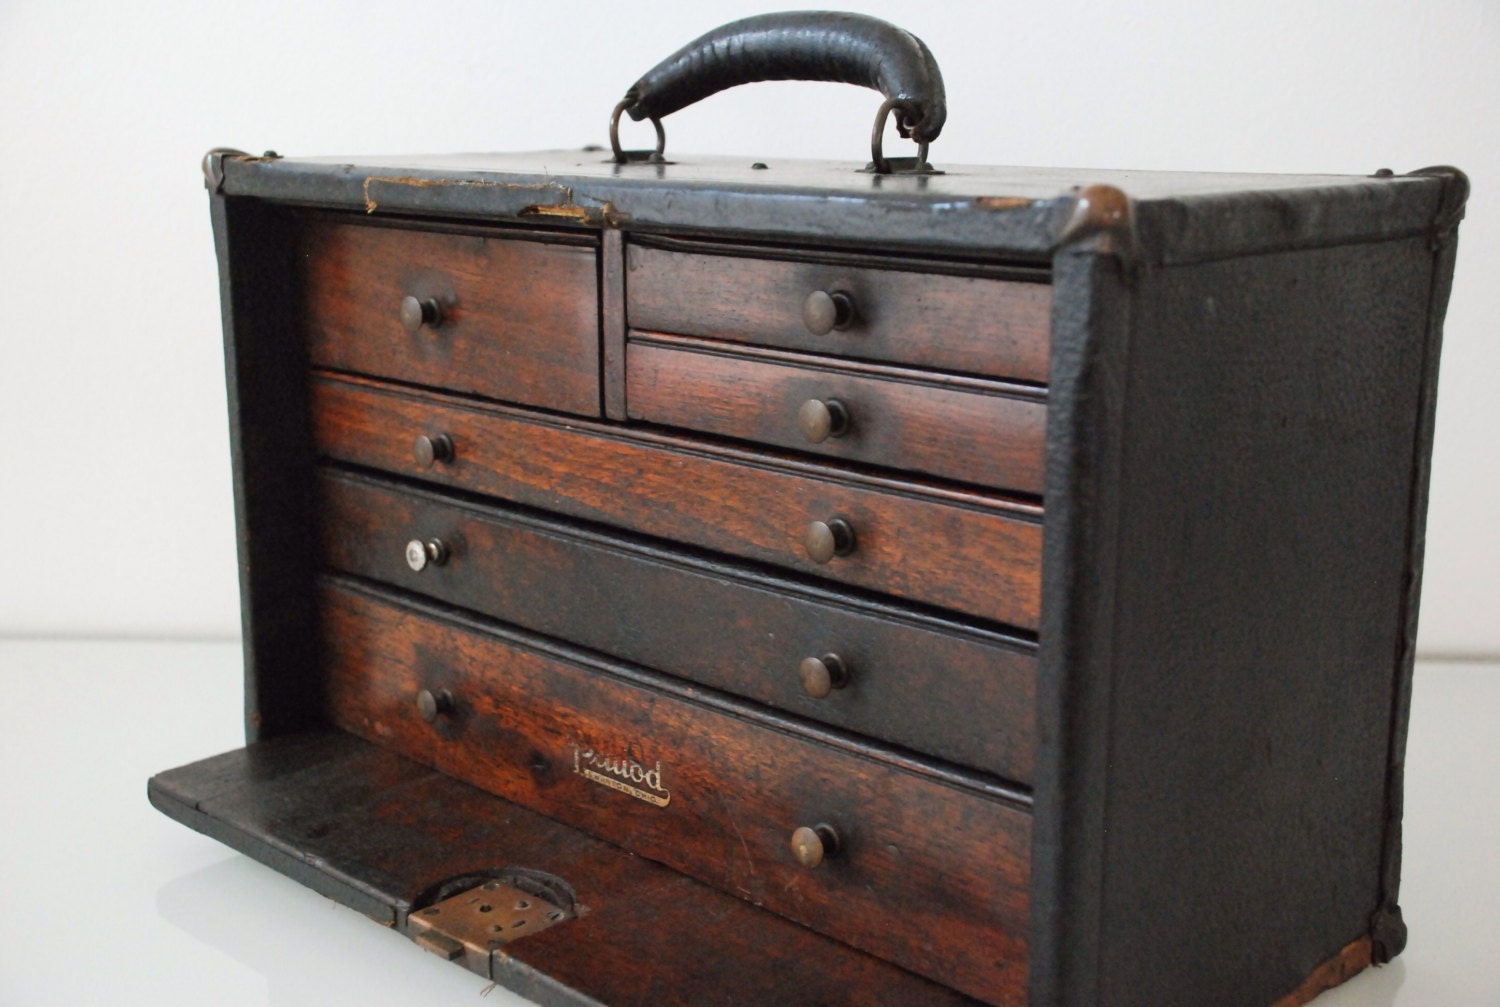 tool box tool chest wooden tool box antique tool box by littlecows